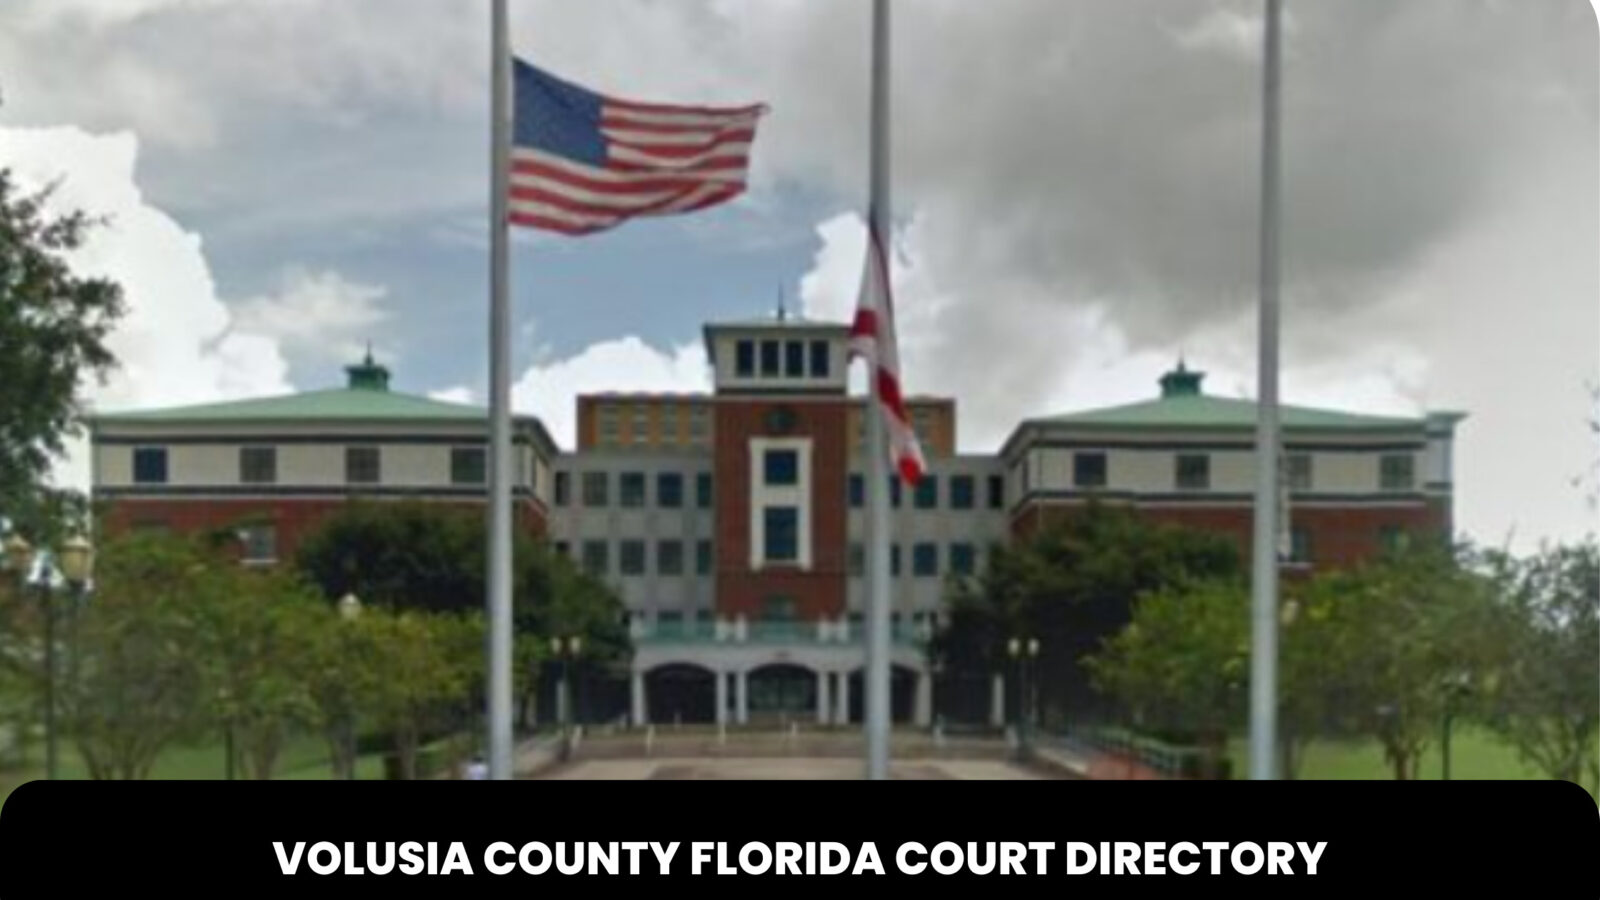 Volusia County Florida Court Directory The Court Direct